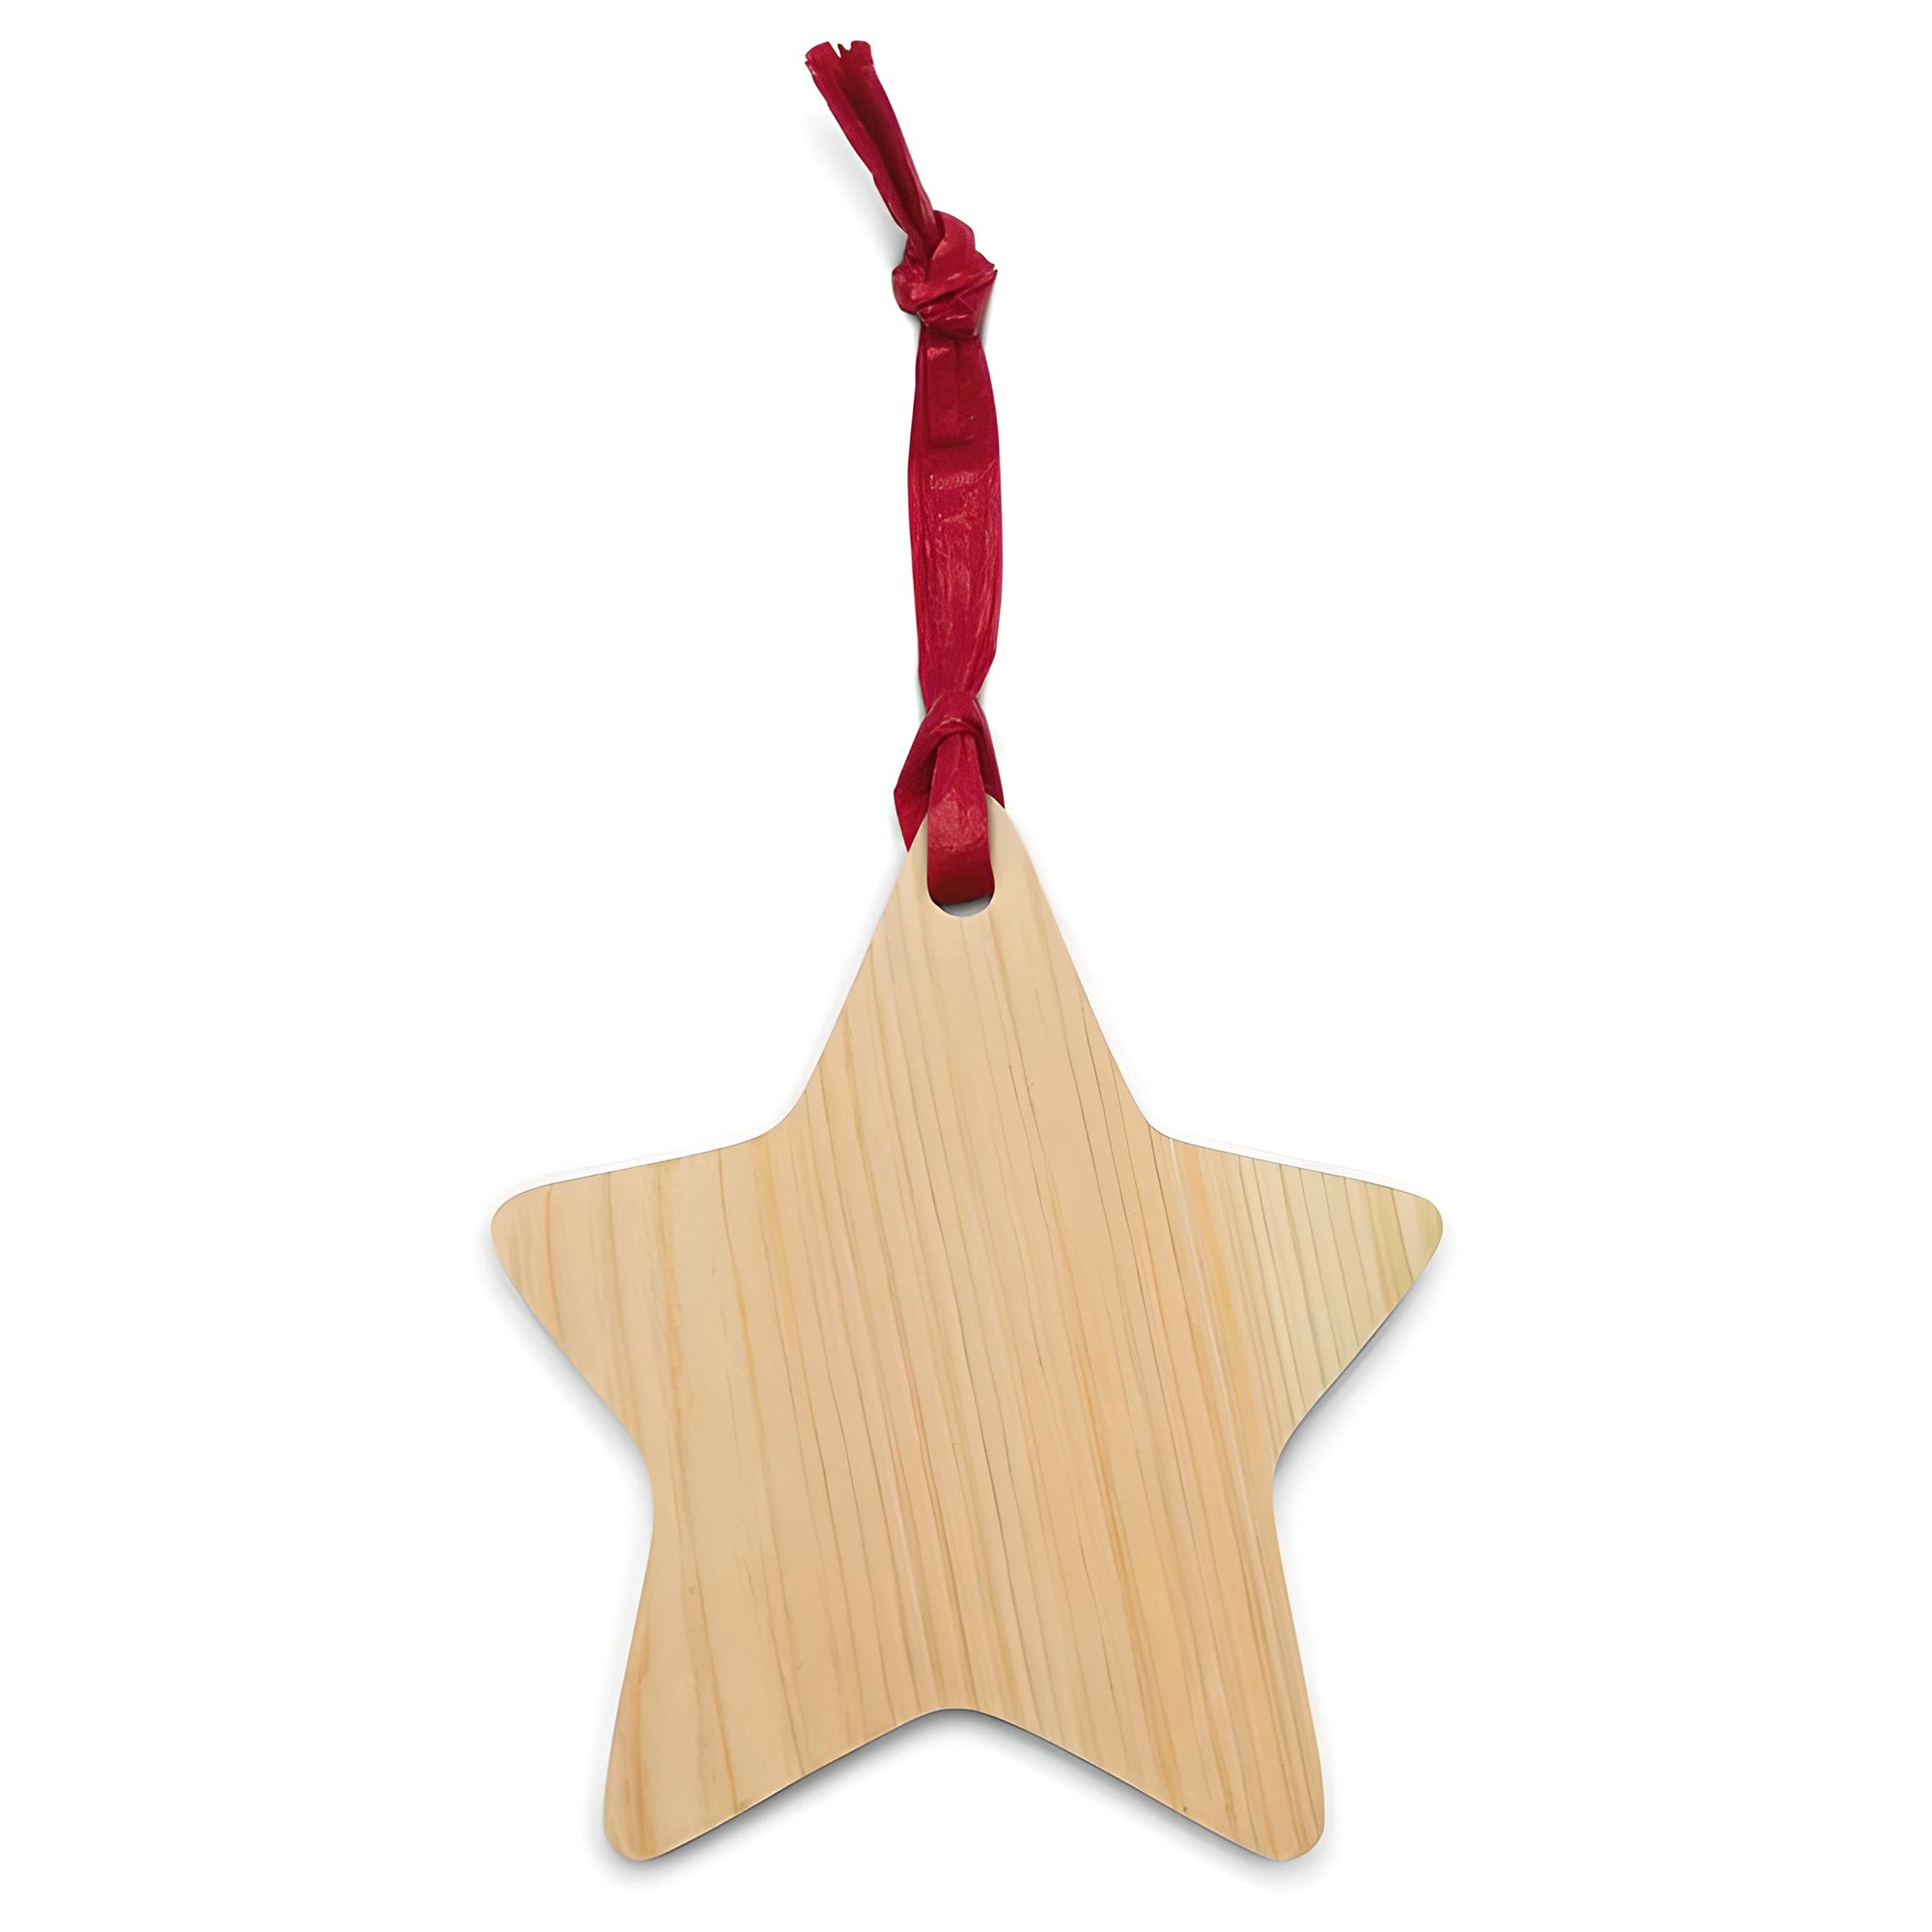 Hand Carved Wooden Ornaments | Upsells for by Poshtraits Shop